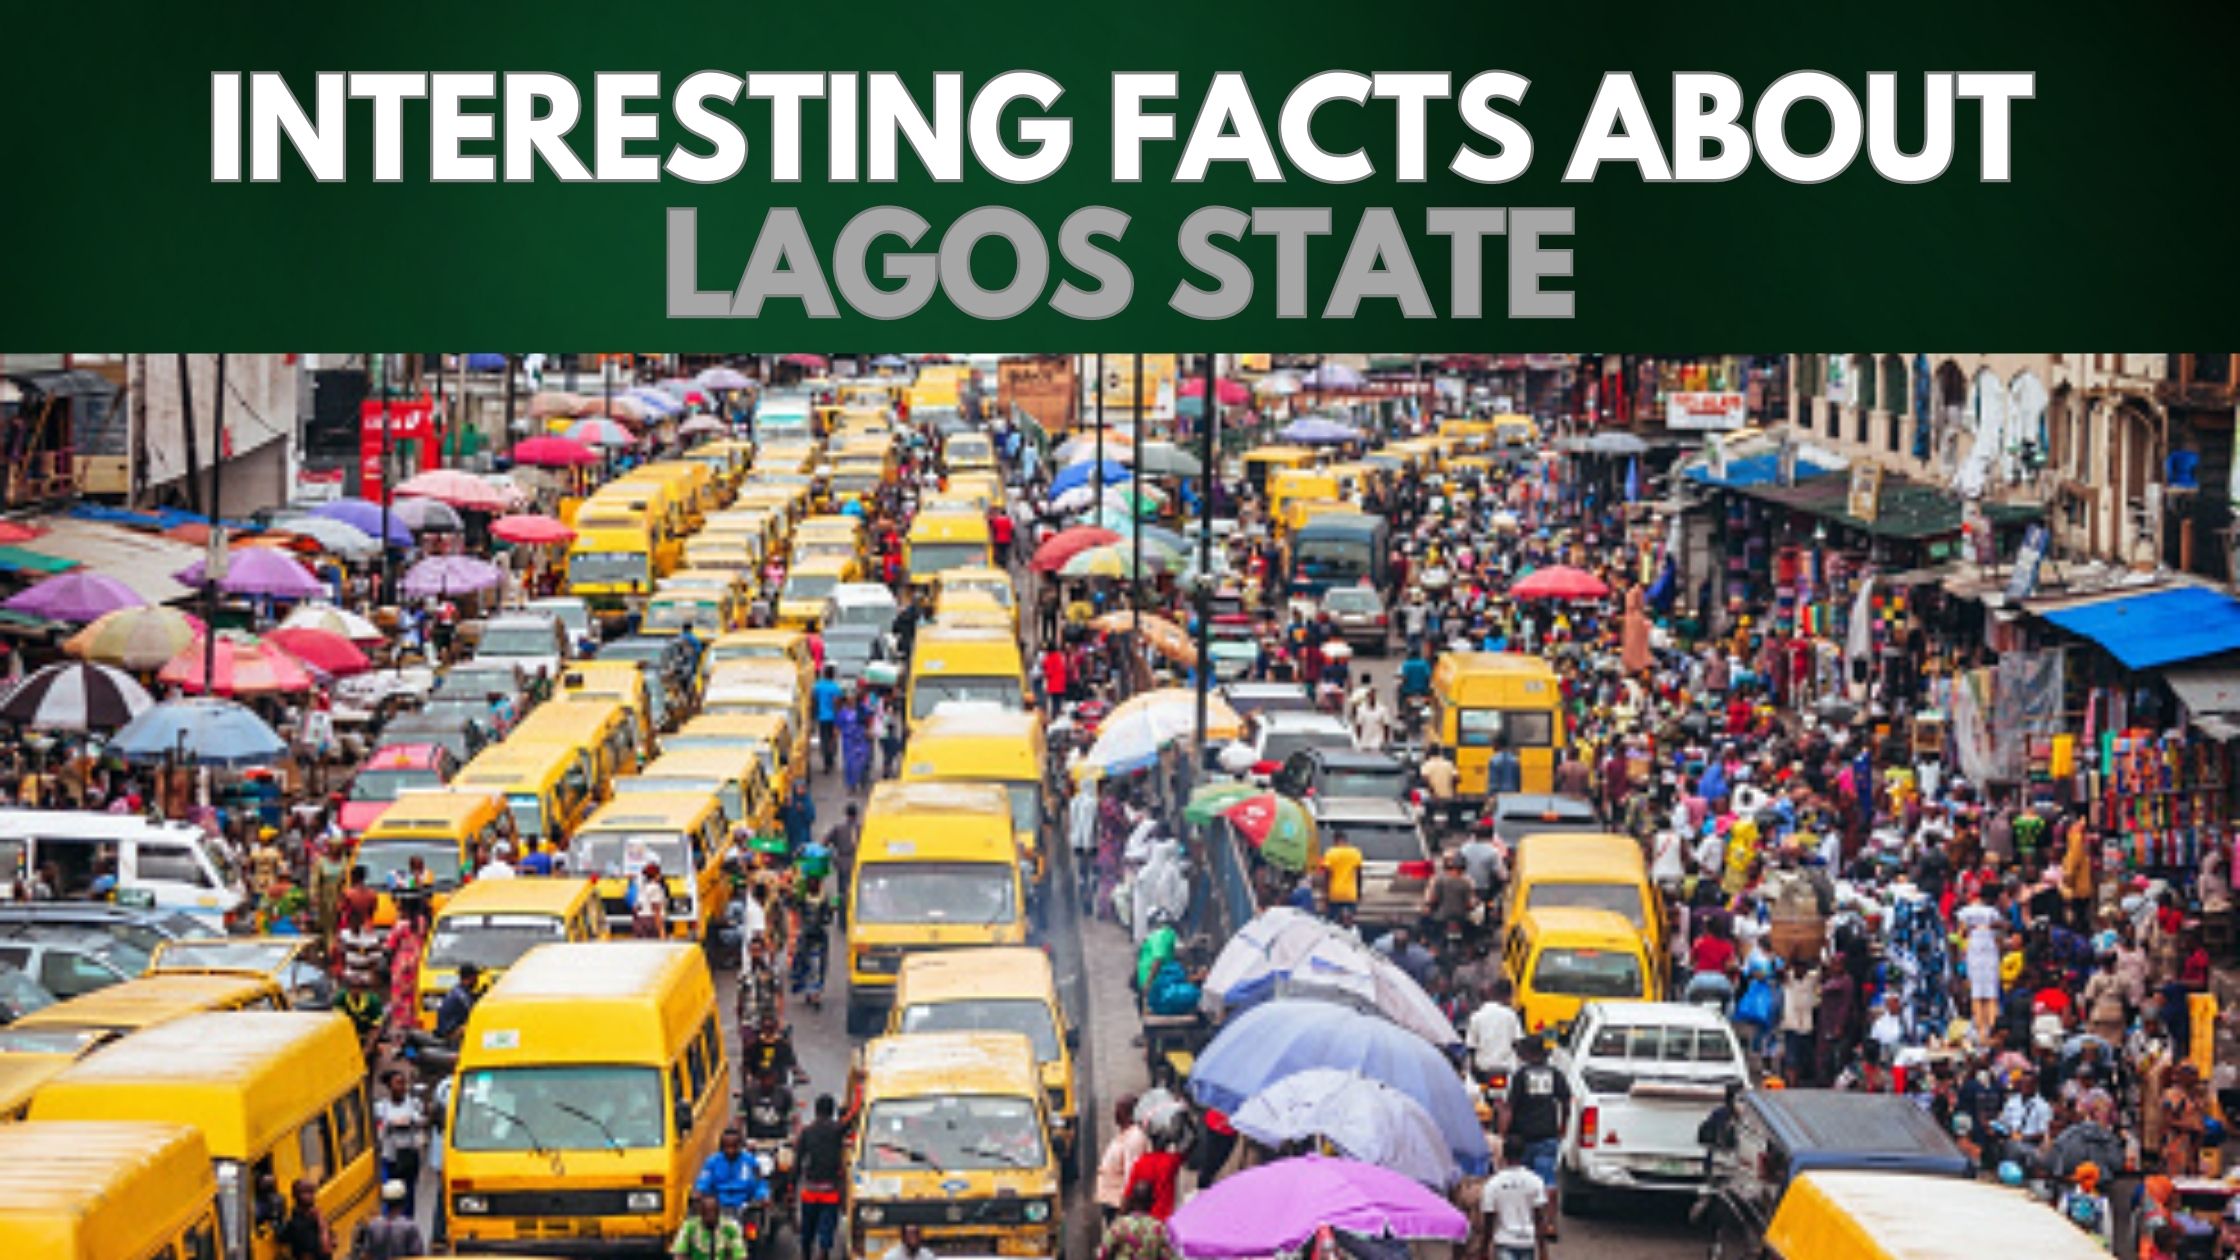 Interesting Facts About Lagos State